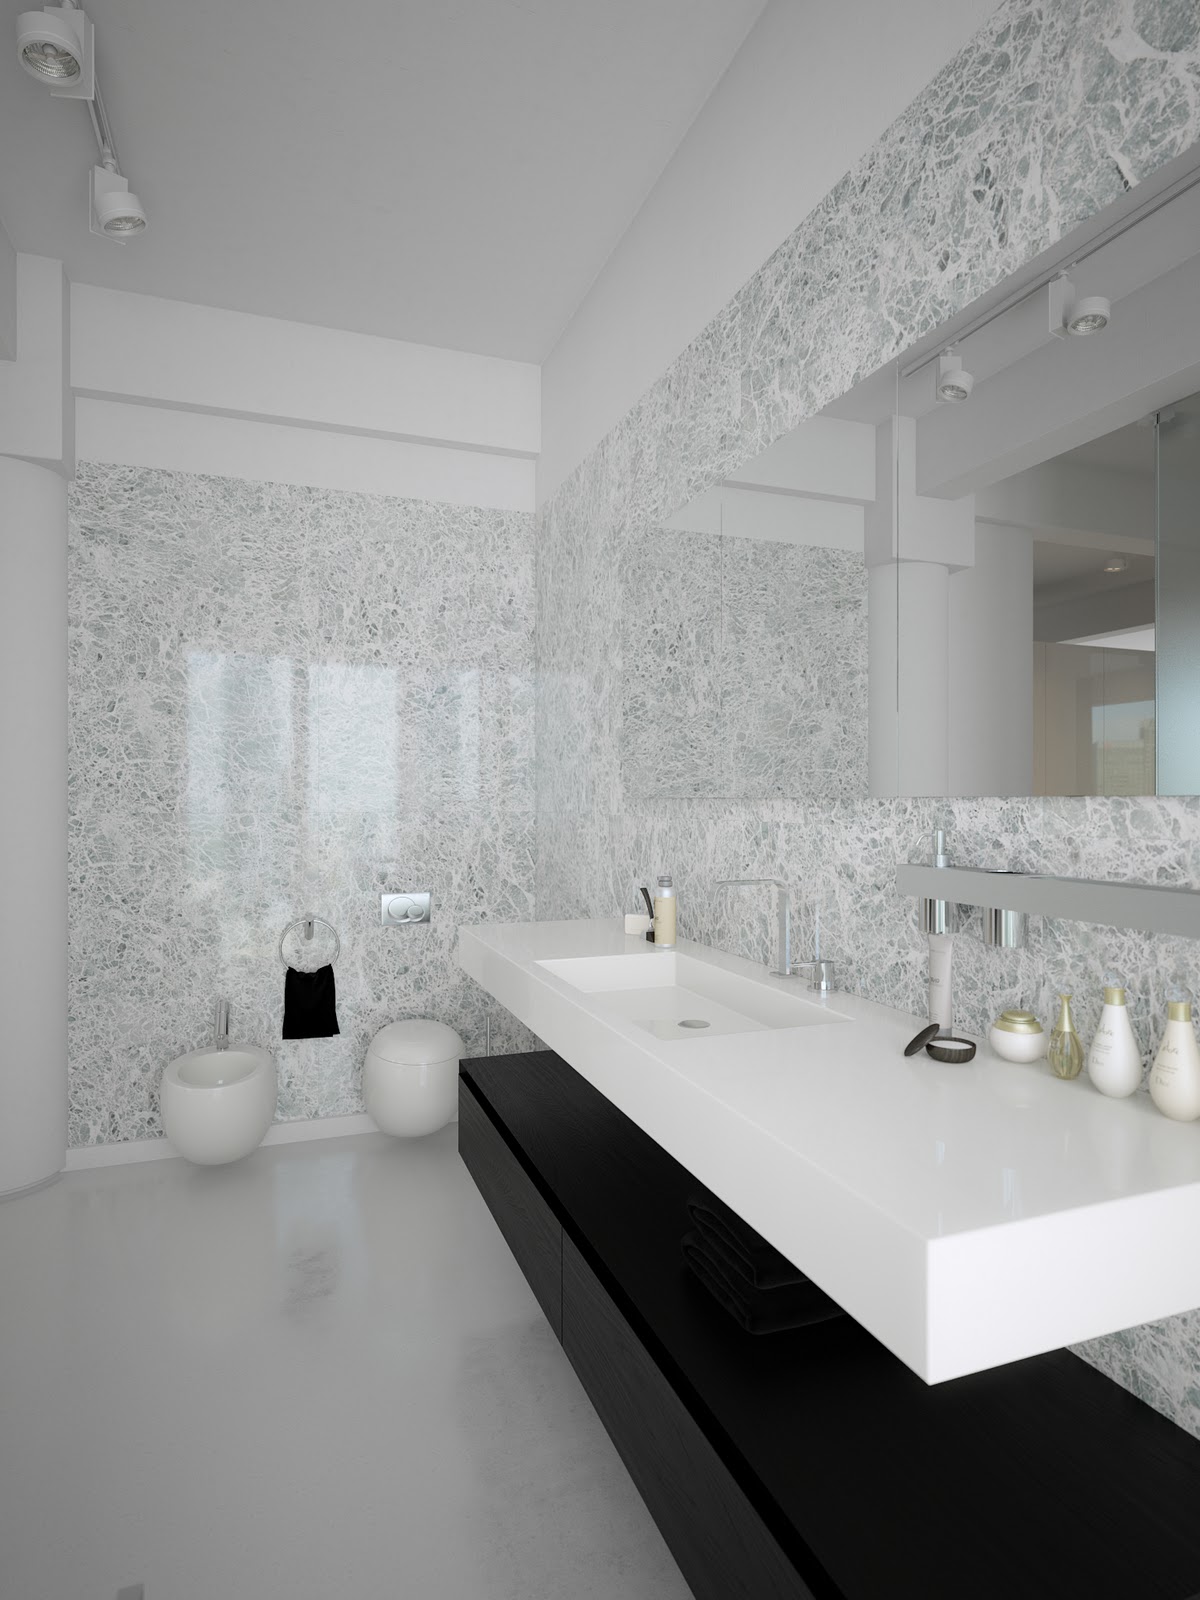 luxurious white bathroom "width =" 1200 "height =" 1600 "srcset =" https://mileray.com/wp-content/uploads/2020/05/1588516476_711_Trendy-Bathroom-Design-Ideas-Combined-With-White-Color-Decor-Showing.jpg 1200w, https://mileray.com/ wp-content / uploads / 2016/09 / Sergey-Baskakov-225x300.jpg 225w, https://mileray.com/wp-content/uploads/2016/09/Sergey-Baskakov-768x1024.jpg 768w, https: // mileray.com/wp-content/uploads/2016/09/Sergey-Baskakov-696x928.jpg 696w, https://mileray.com/wp-content/uploads/2016/09/Sergey-Baskakov-1068x1424.jpg 1068w, https://mileray.com/wp-content/uploads/2016/09/Sergey-Baskakov-315x420.jpg 315w "Sizes =" (maximum width: 1200px) 100vw, 1200px